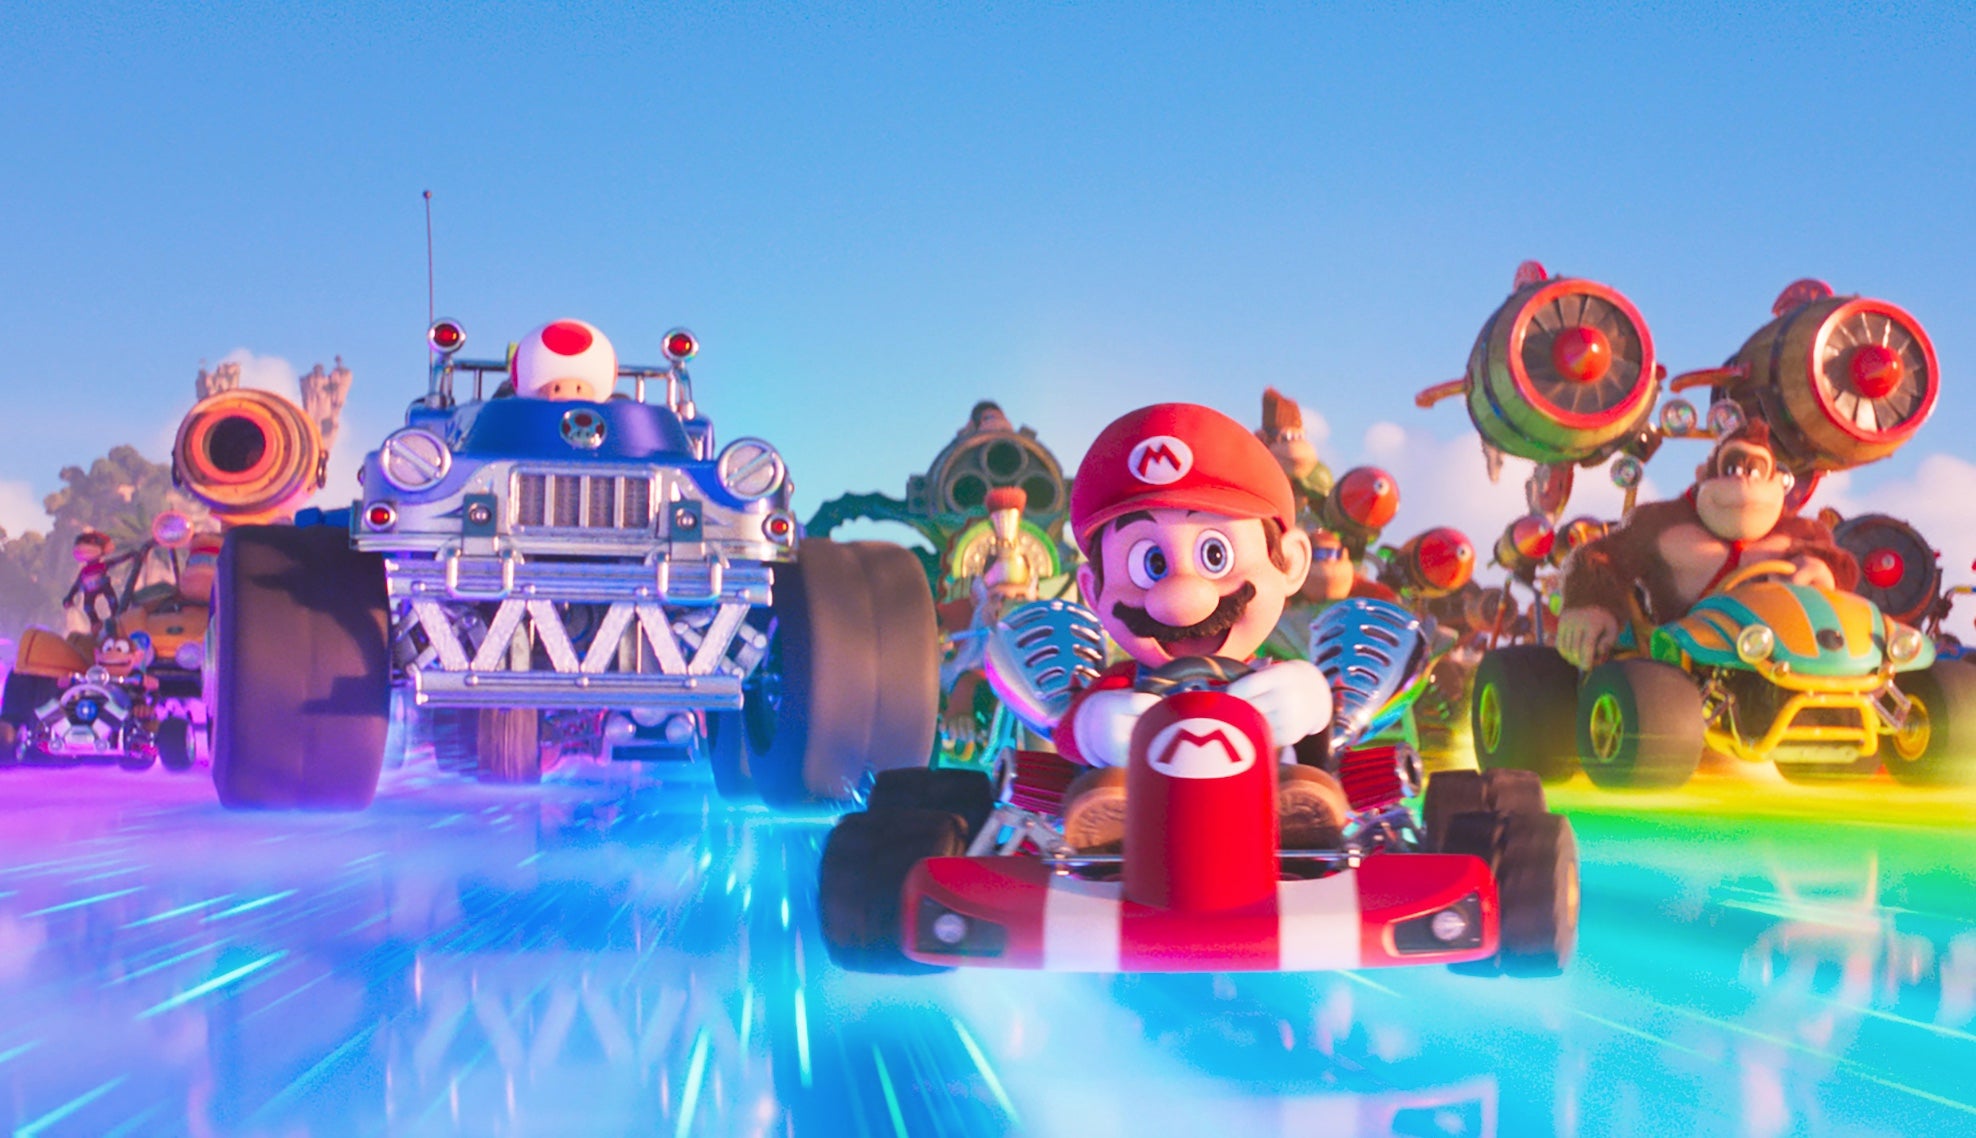 First Mario and Mario Kart, what's next? (Image: Universal)